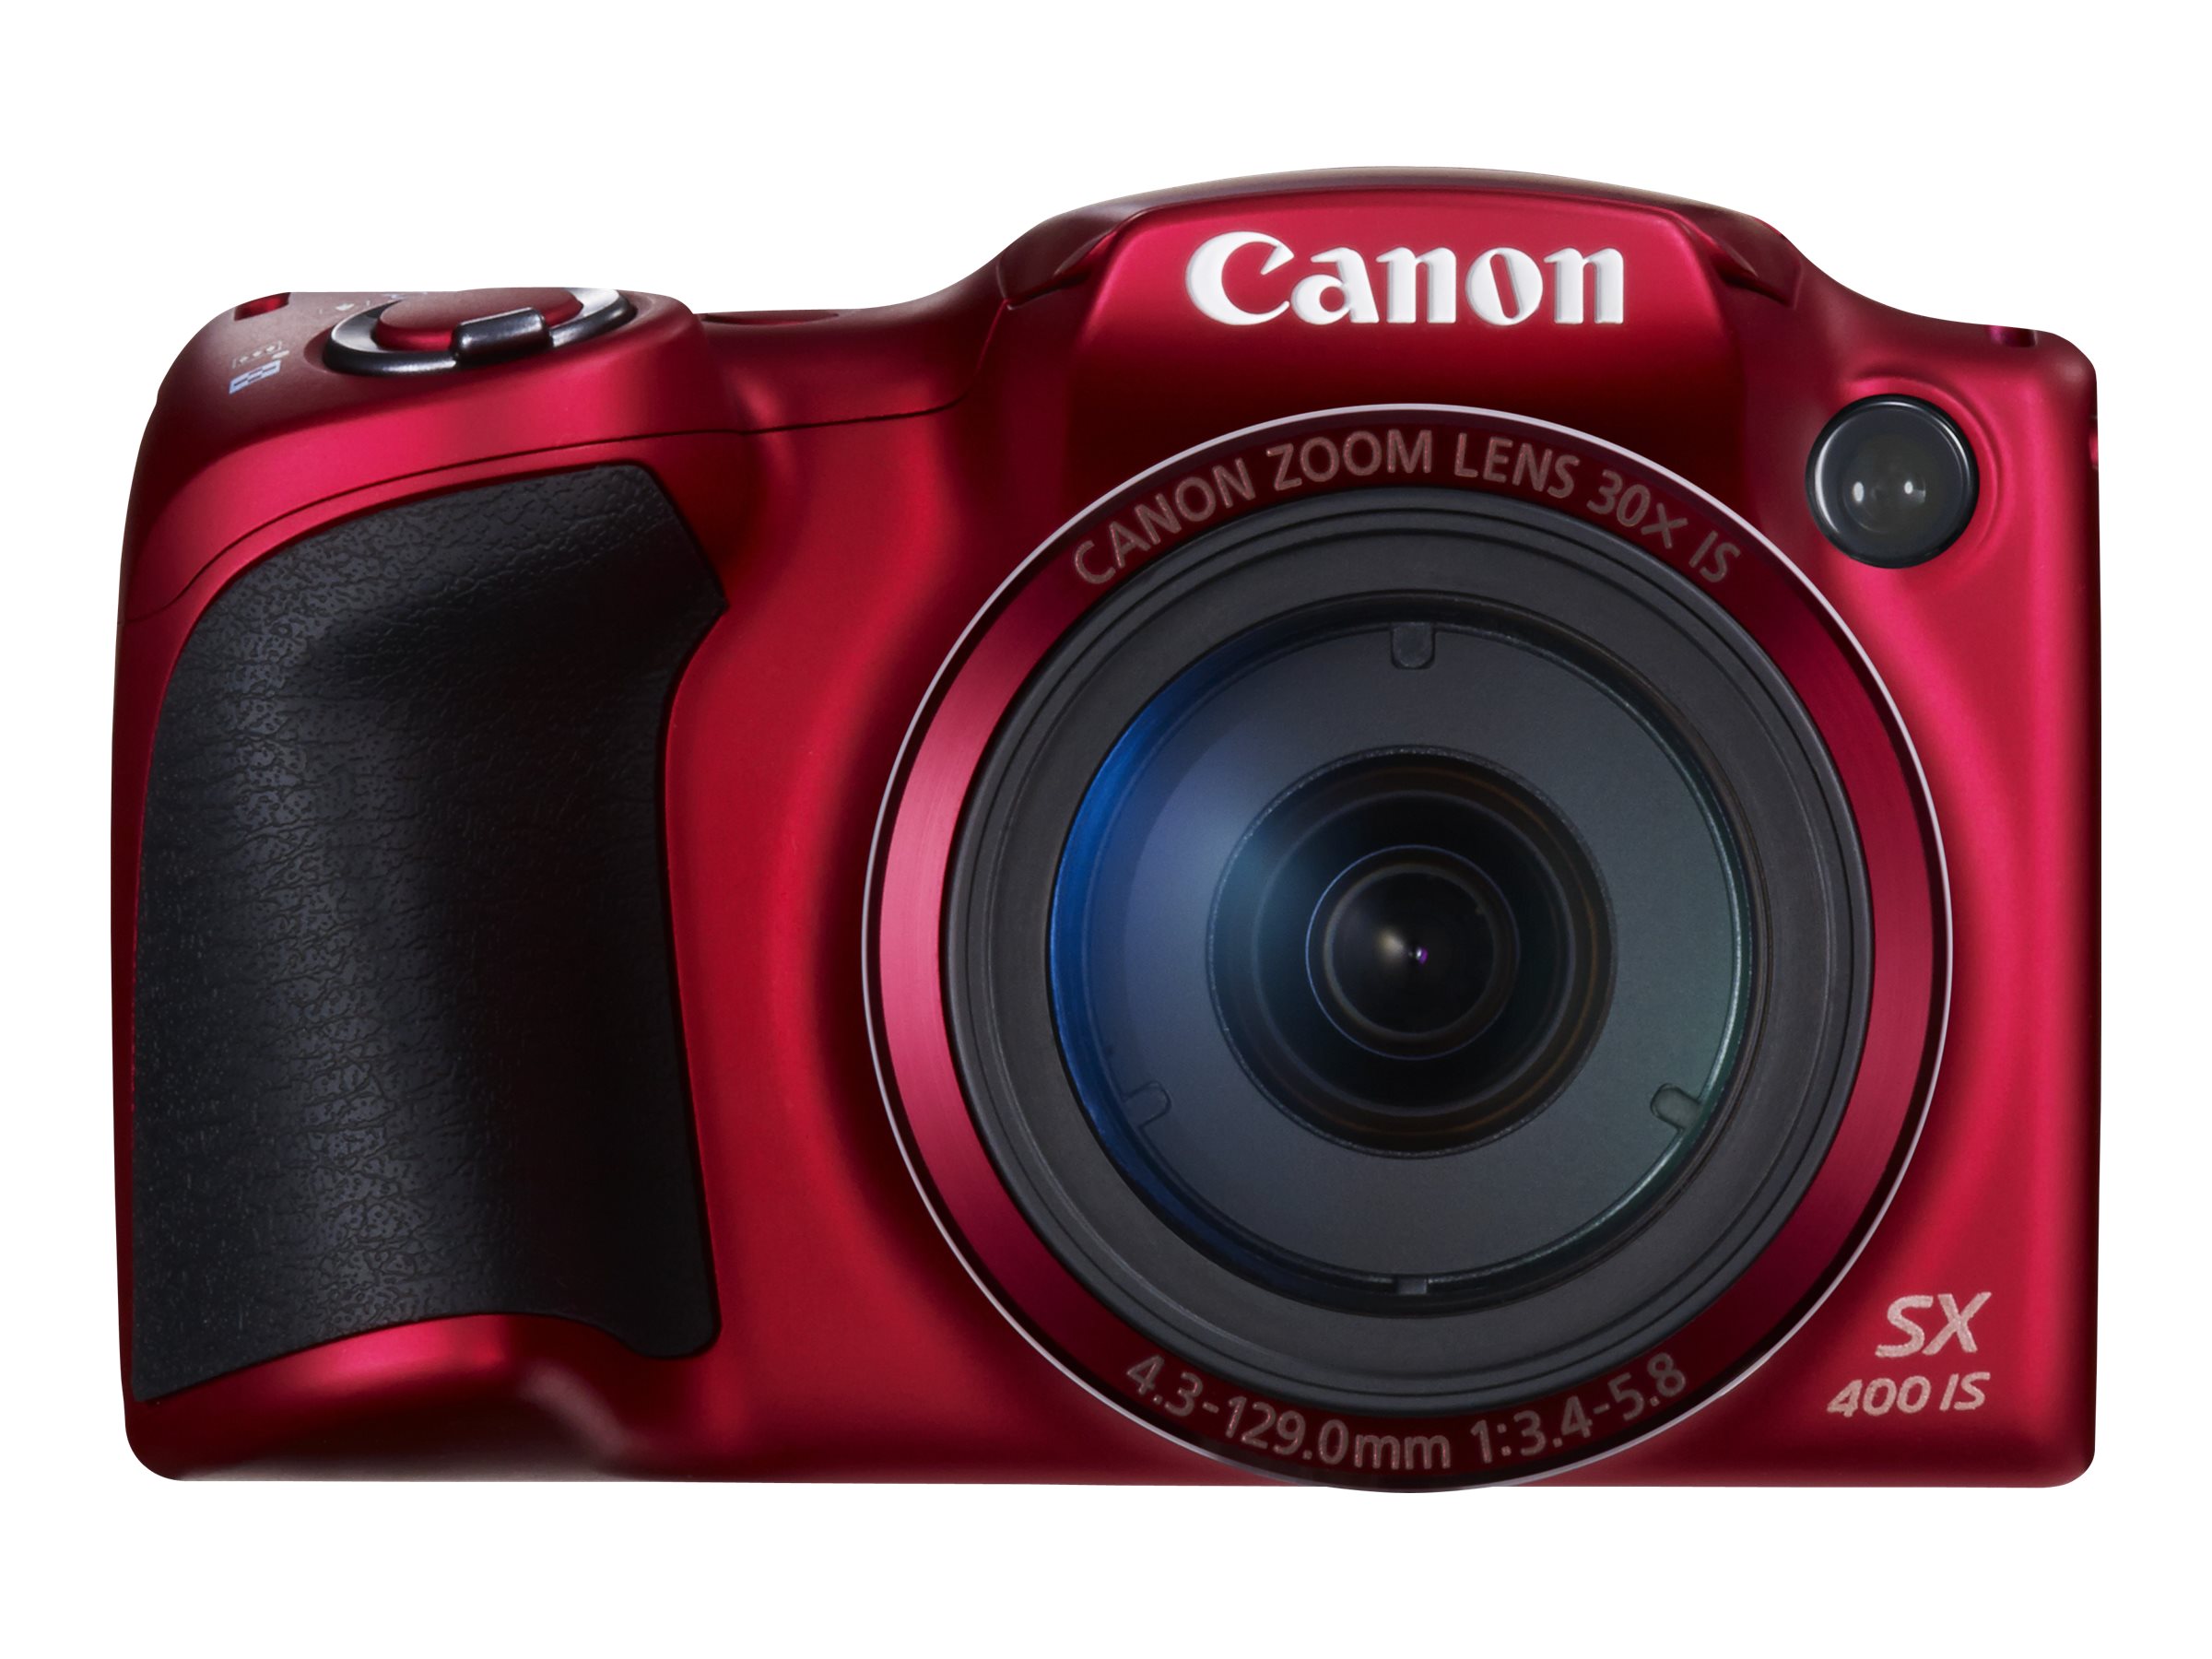 Canon PowerShot SX400 IS - Digital camera - High Definition - compact - 16.0 MP - 30 x optical zoom - red - image 58 of 72